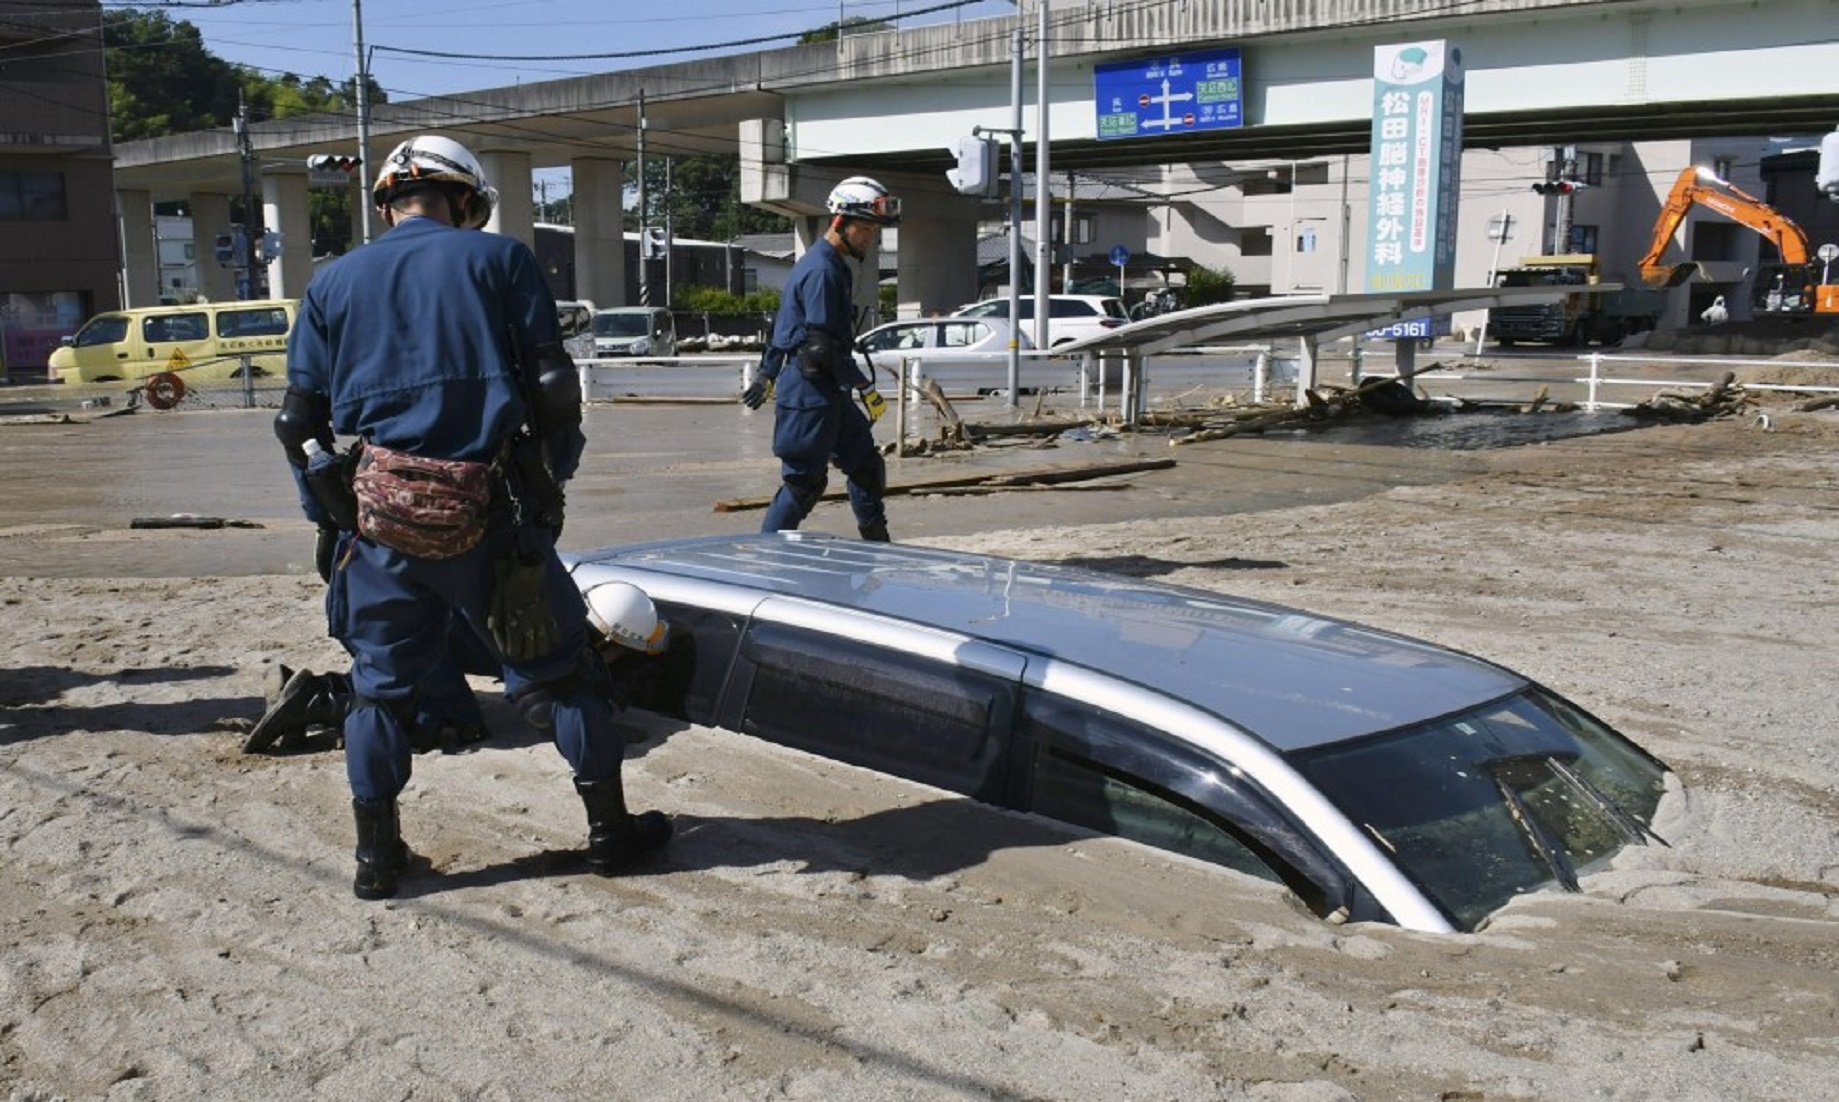 20 People Likely Missing From Central Japan Mudslide: Local Authorities